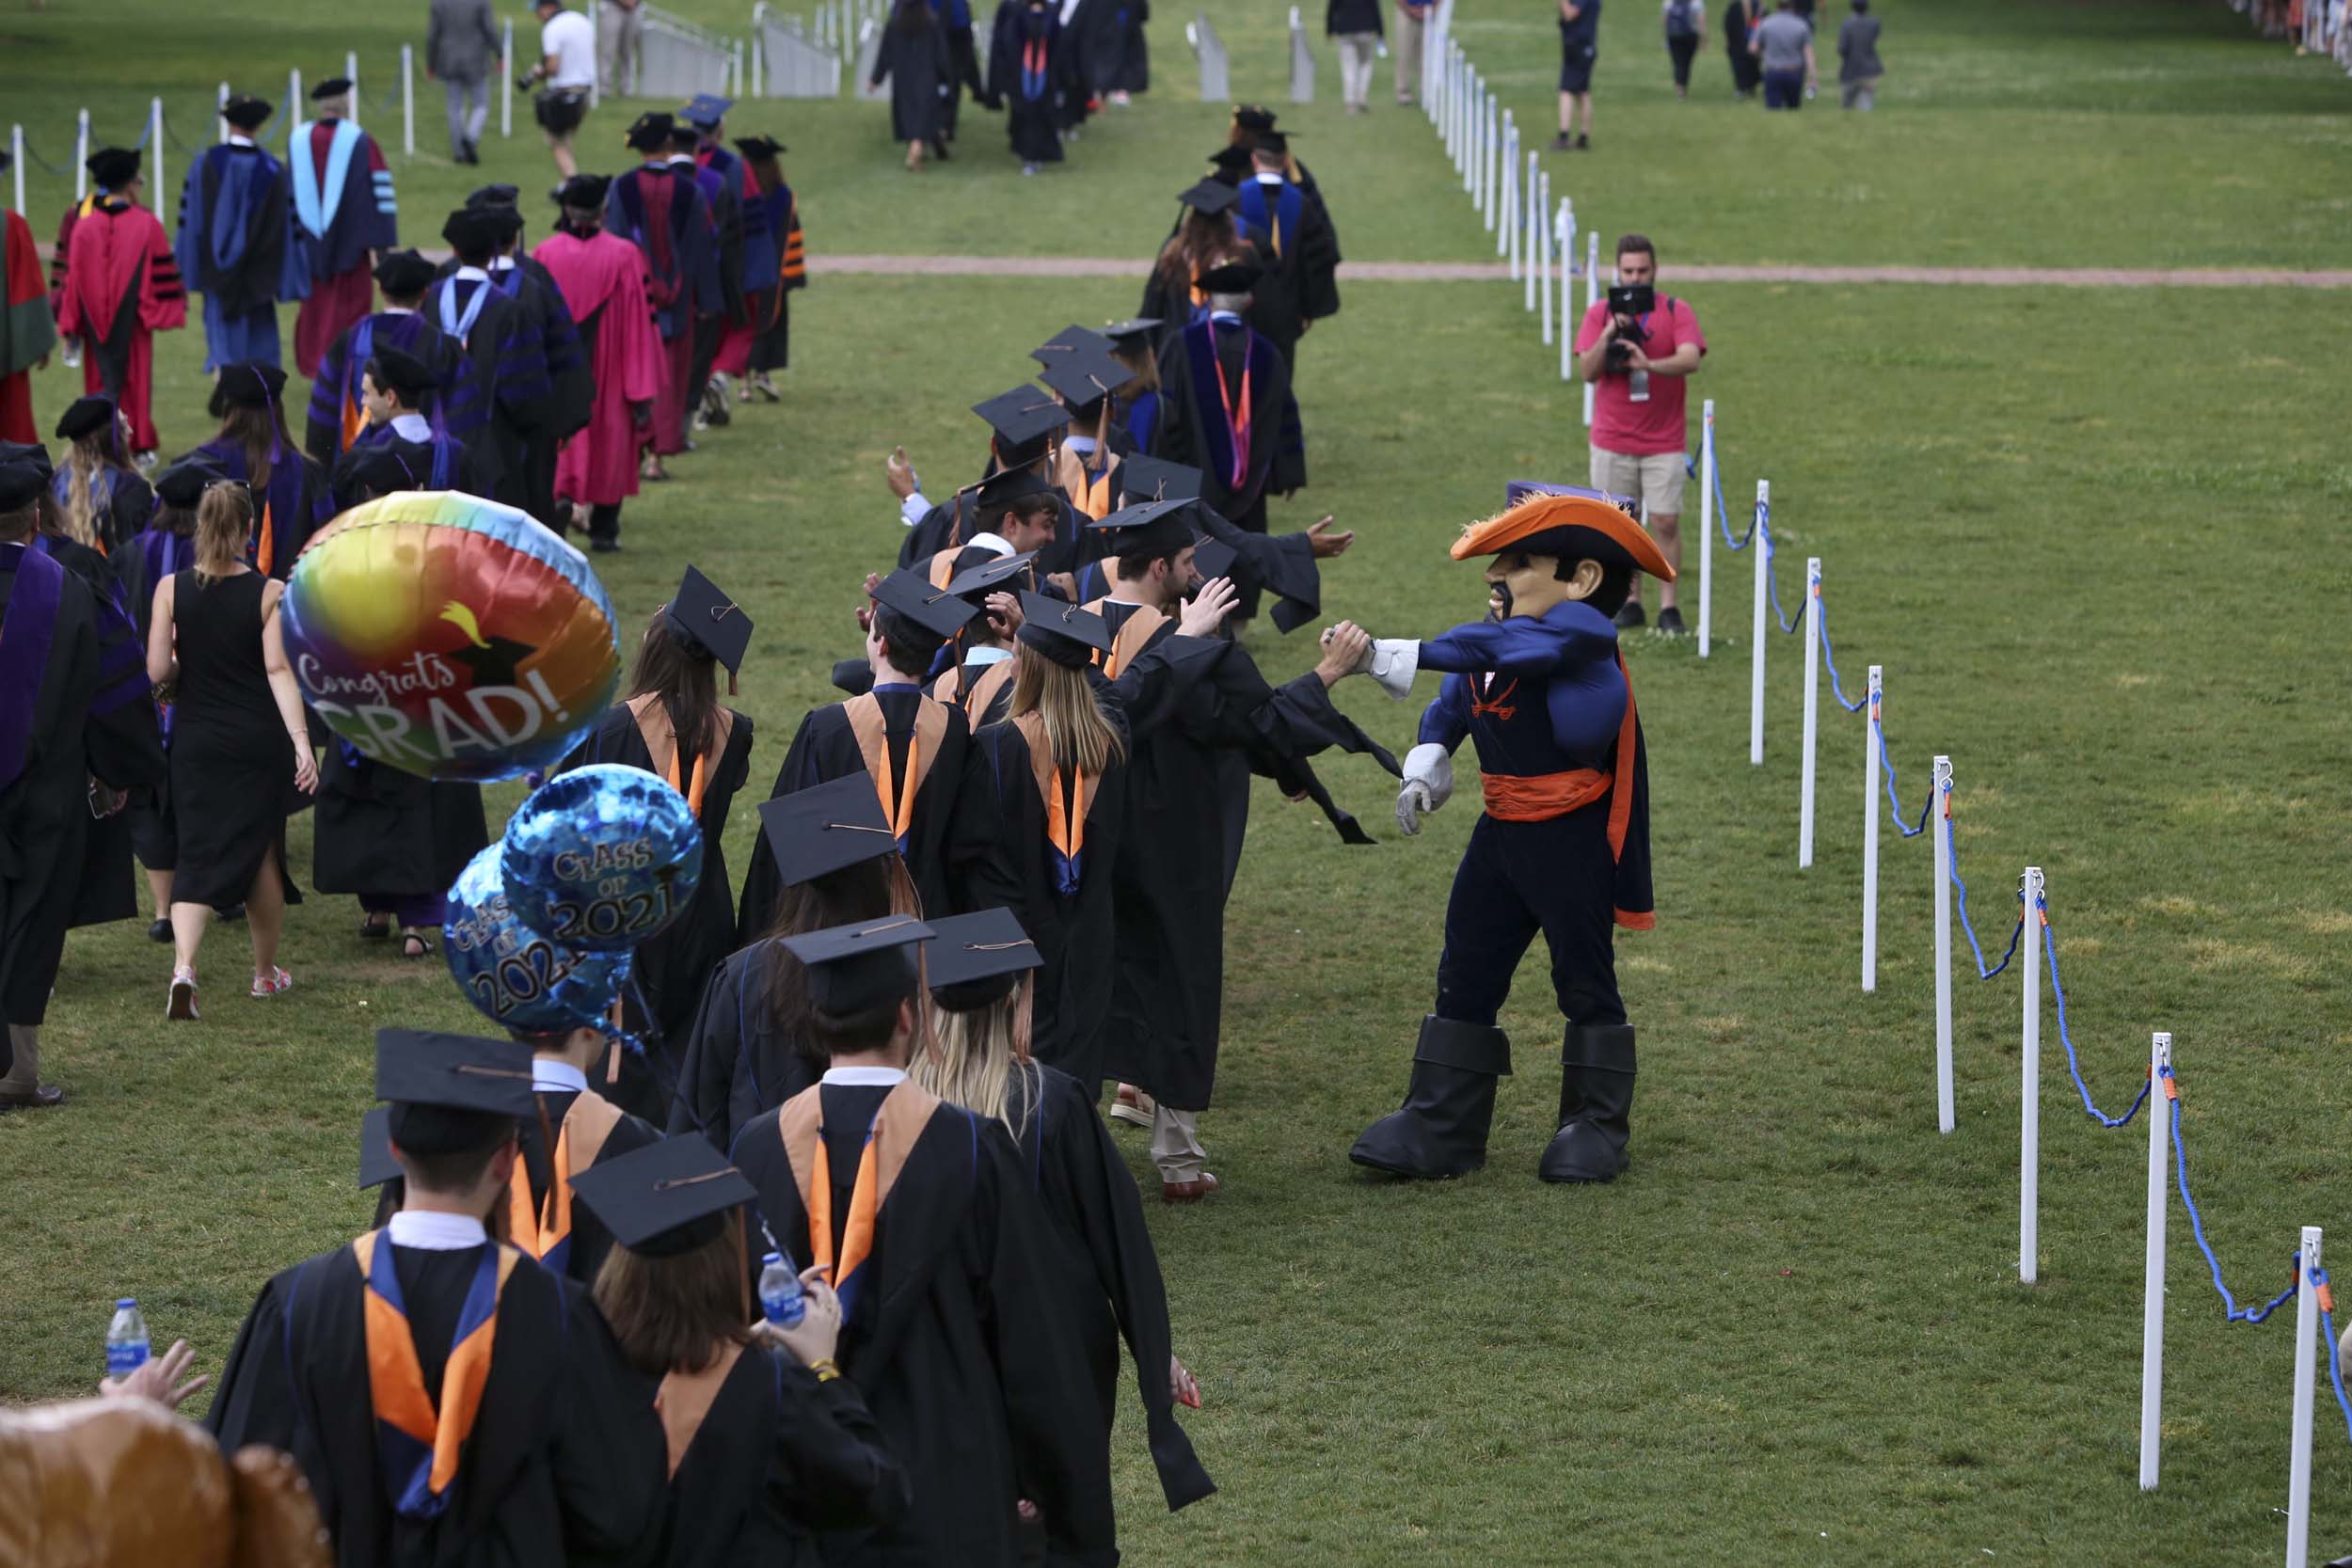 Cav Man high fiving graduates as they walk into final exercises